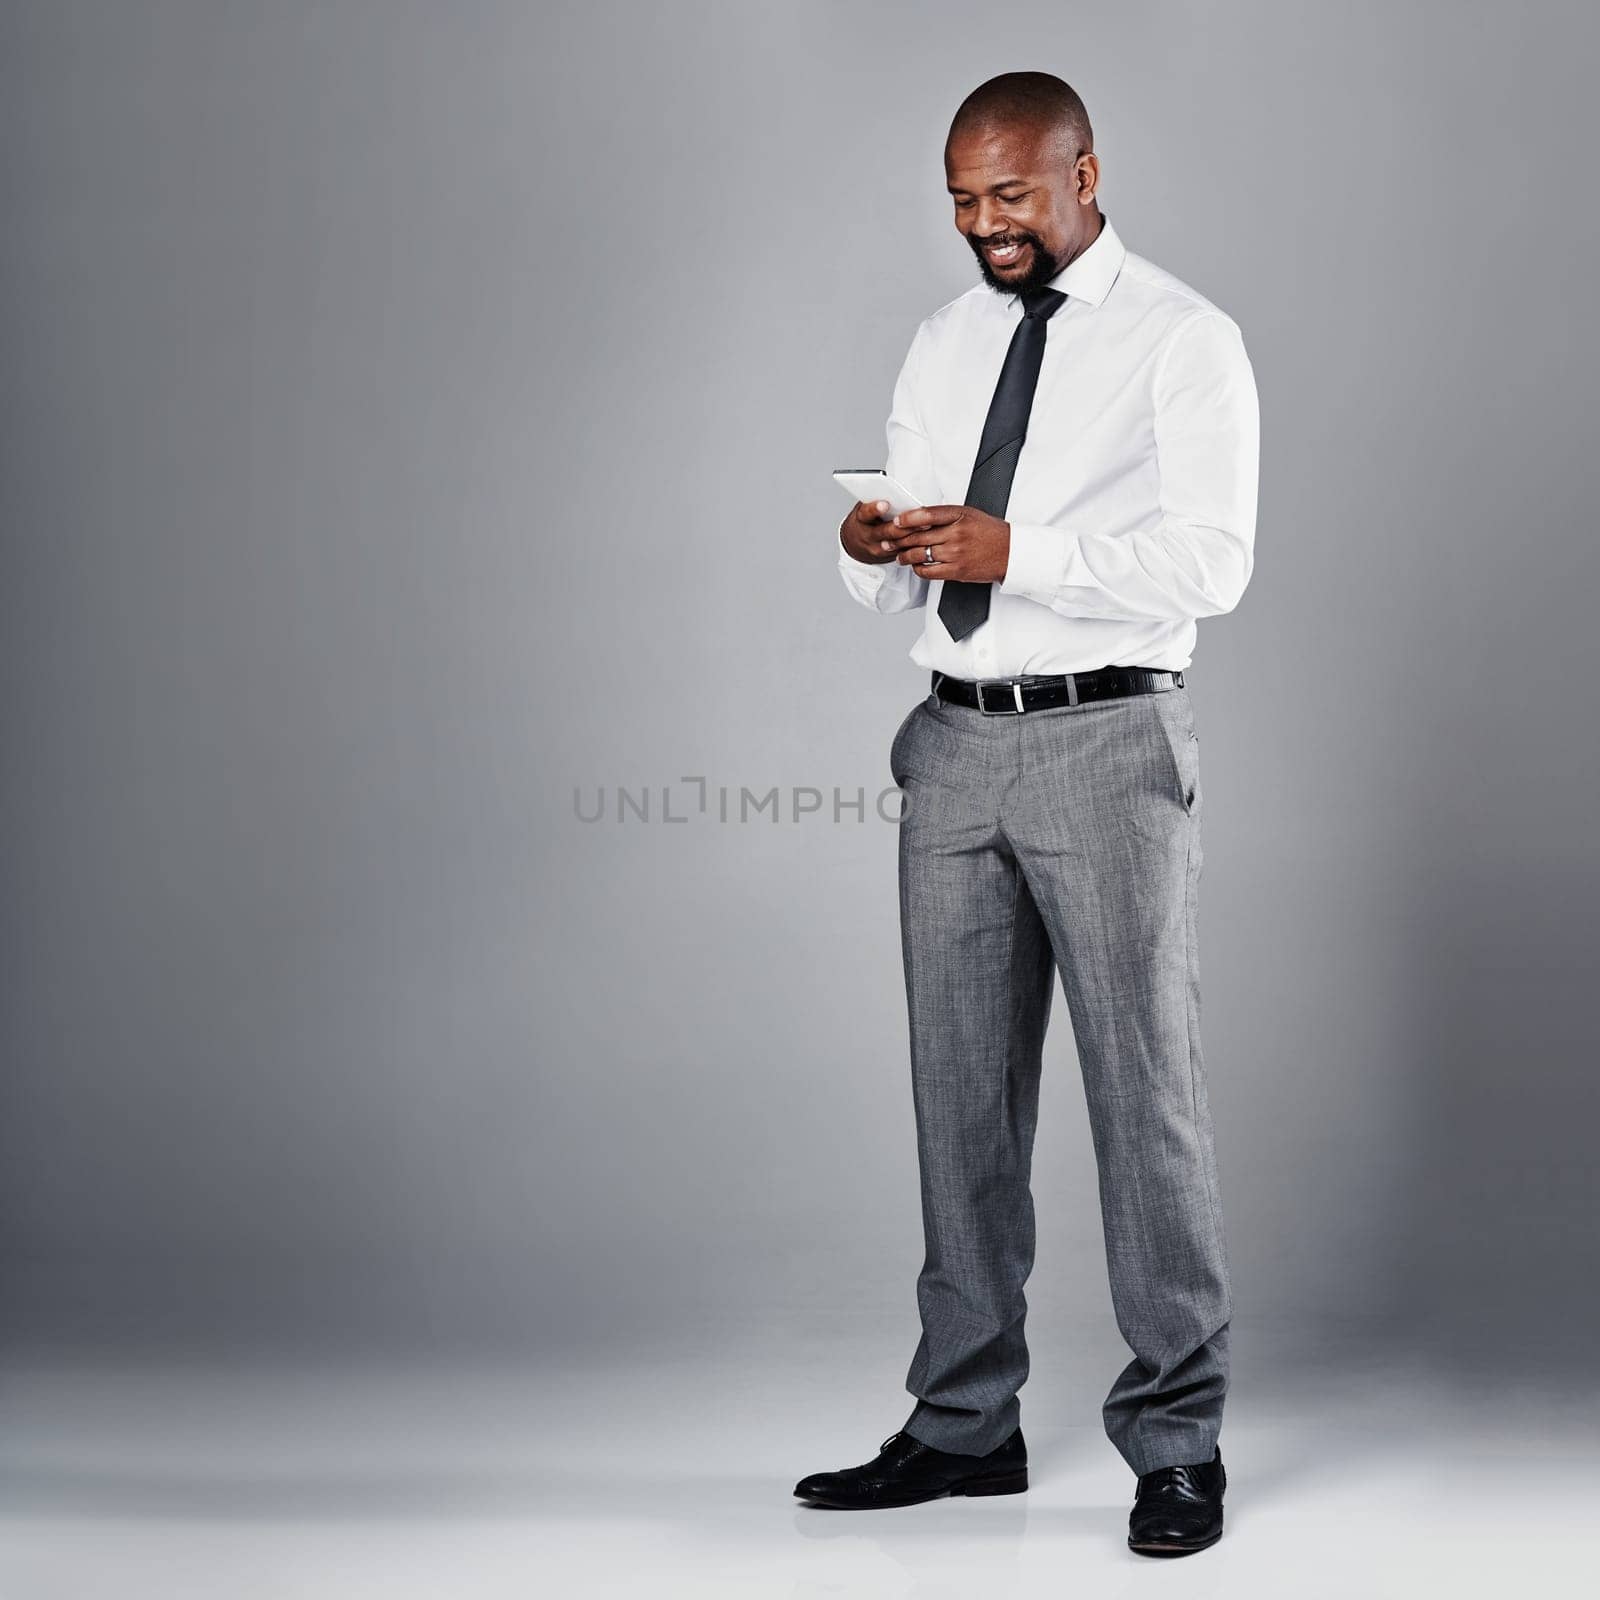 Gain an edge by mobilising your business. Studio shot of a corporate businessman texting on his against a grey background